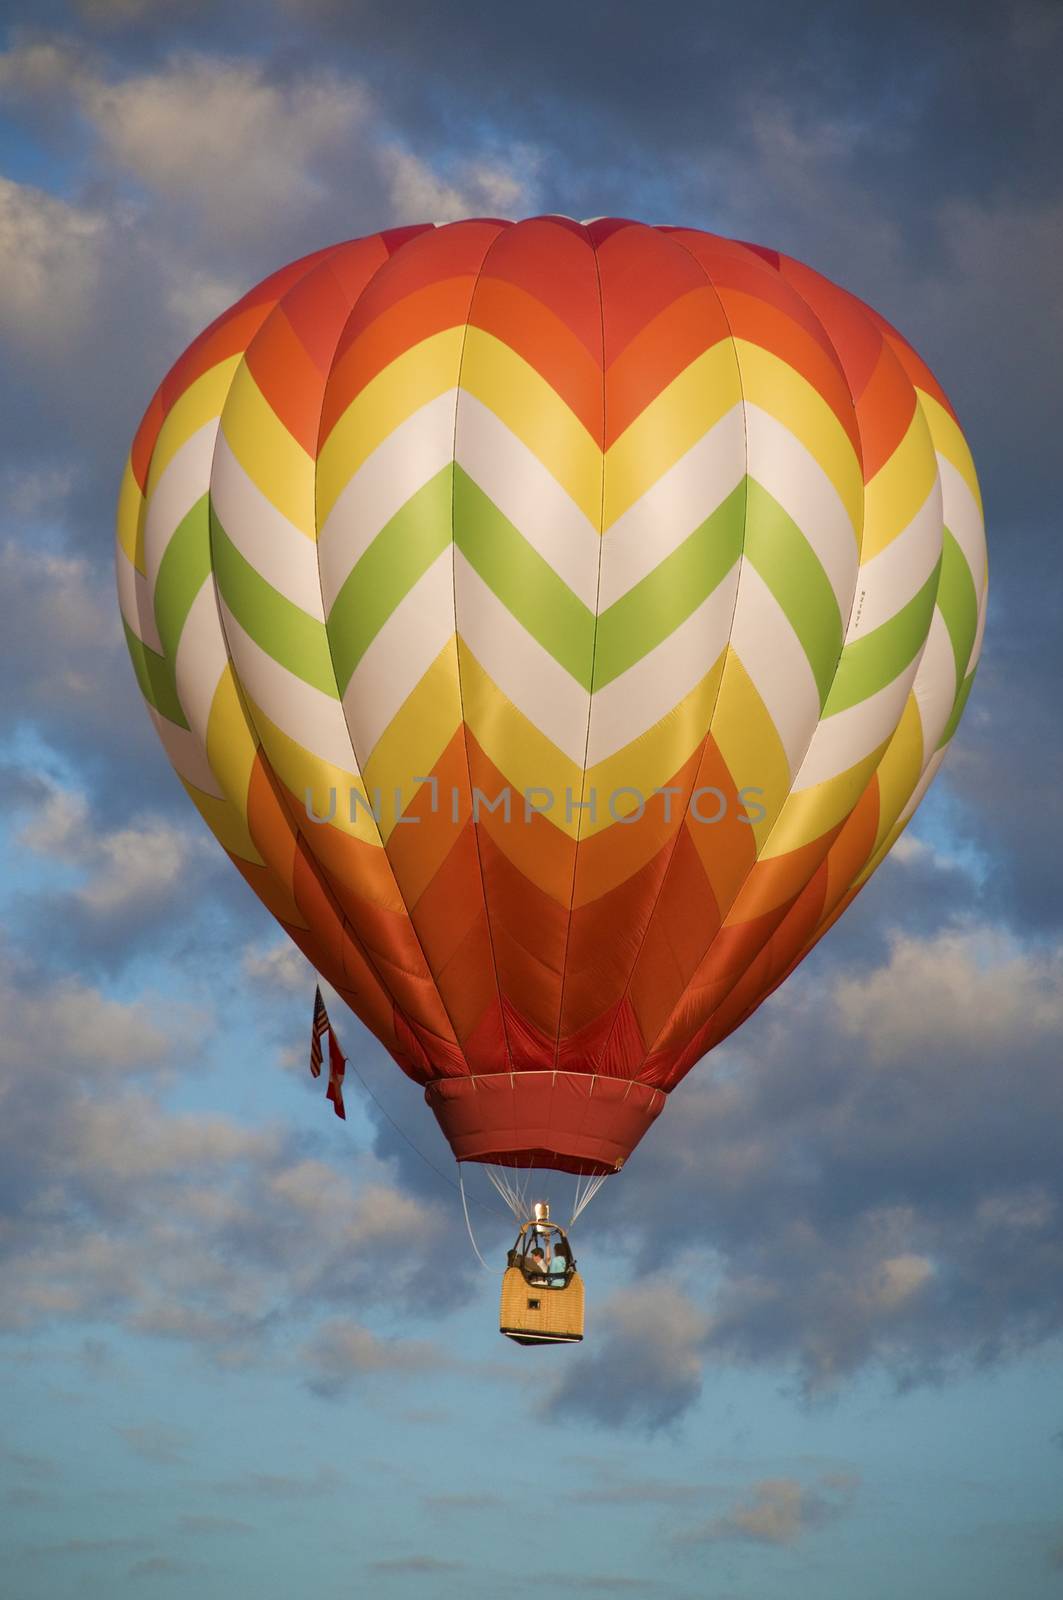 Orange and yellow hot-air balloon floating among clouds